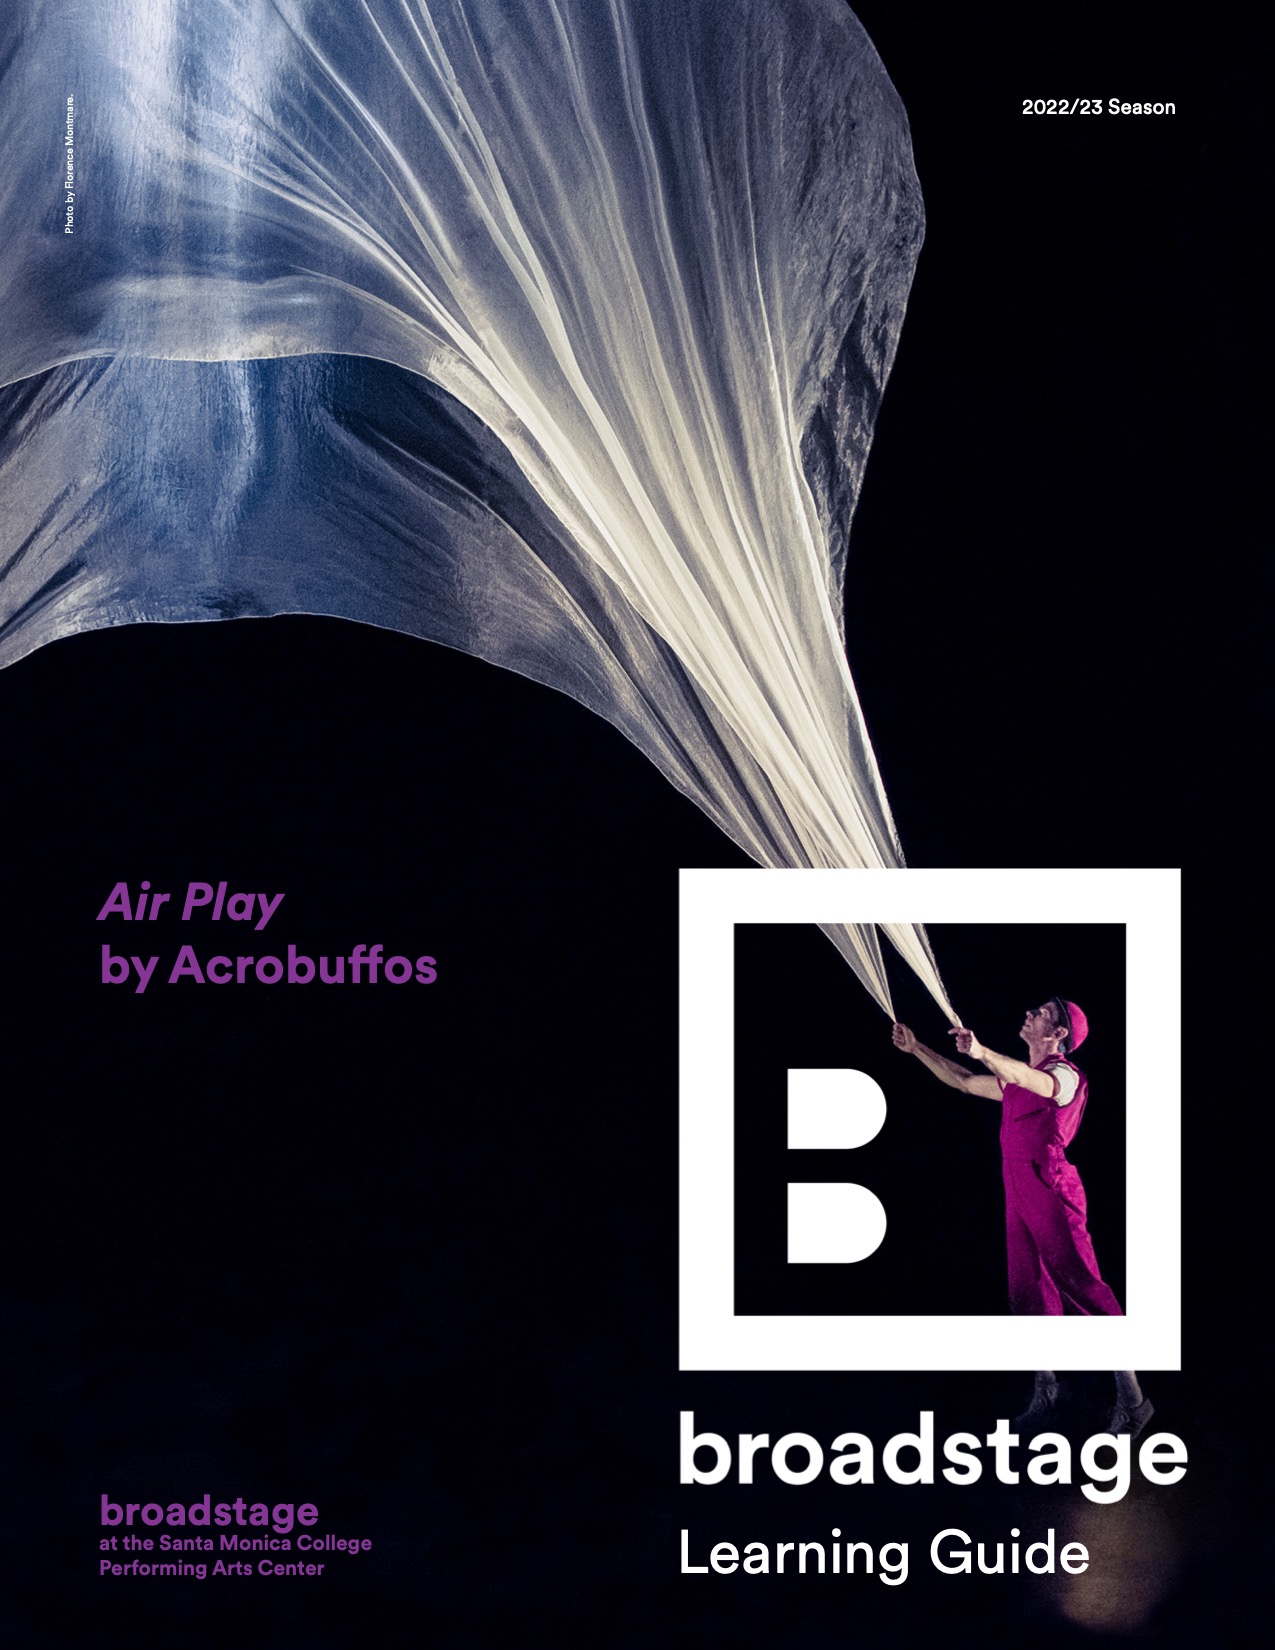 Air Play learning guide cover with image of actor floating a large white piece of fabric on dark stage. Text says "2022/23 Season; Air Play Learning Guide; broadstage at the Santa Monica College Performing Arts Center; photo by Florence Montmare" with large broadstage logo in right corner